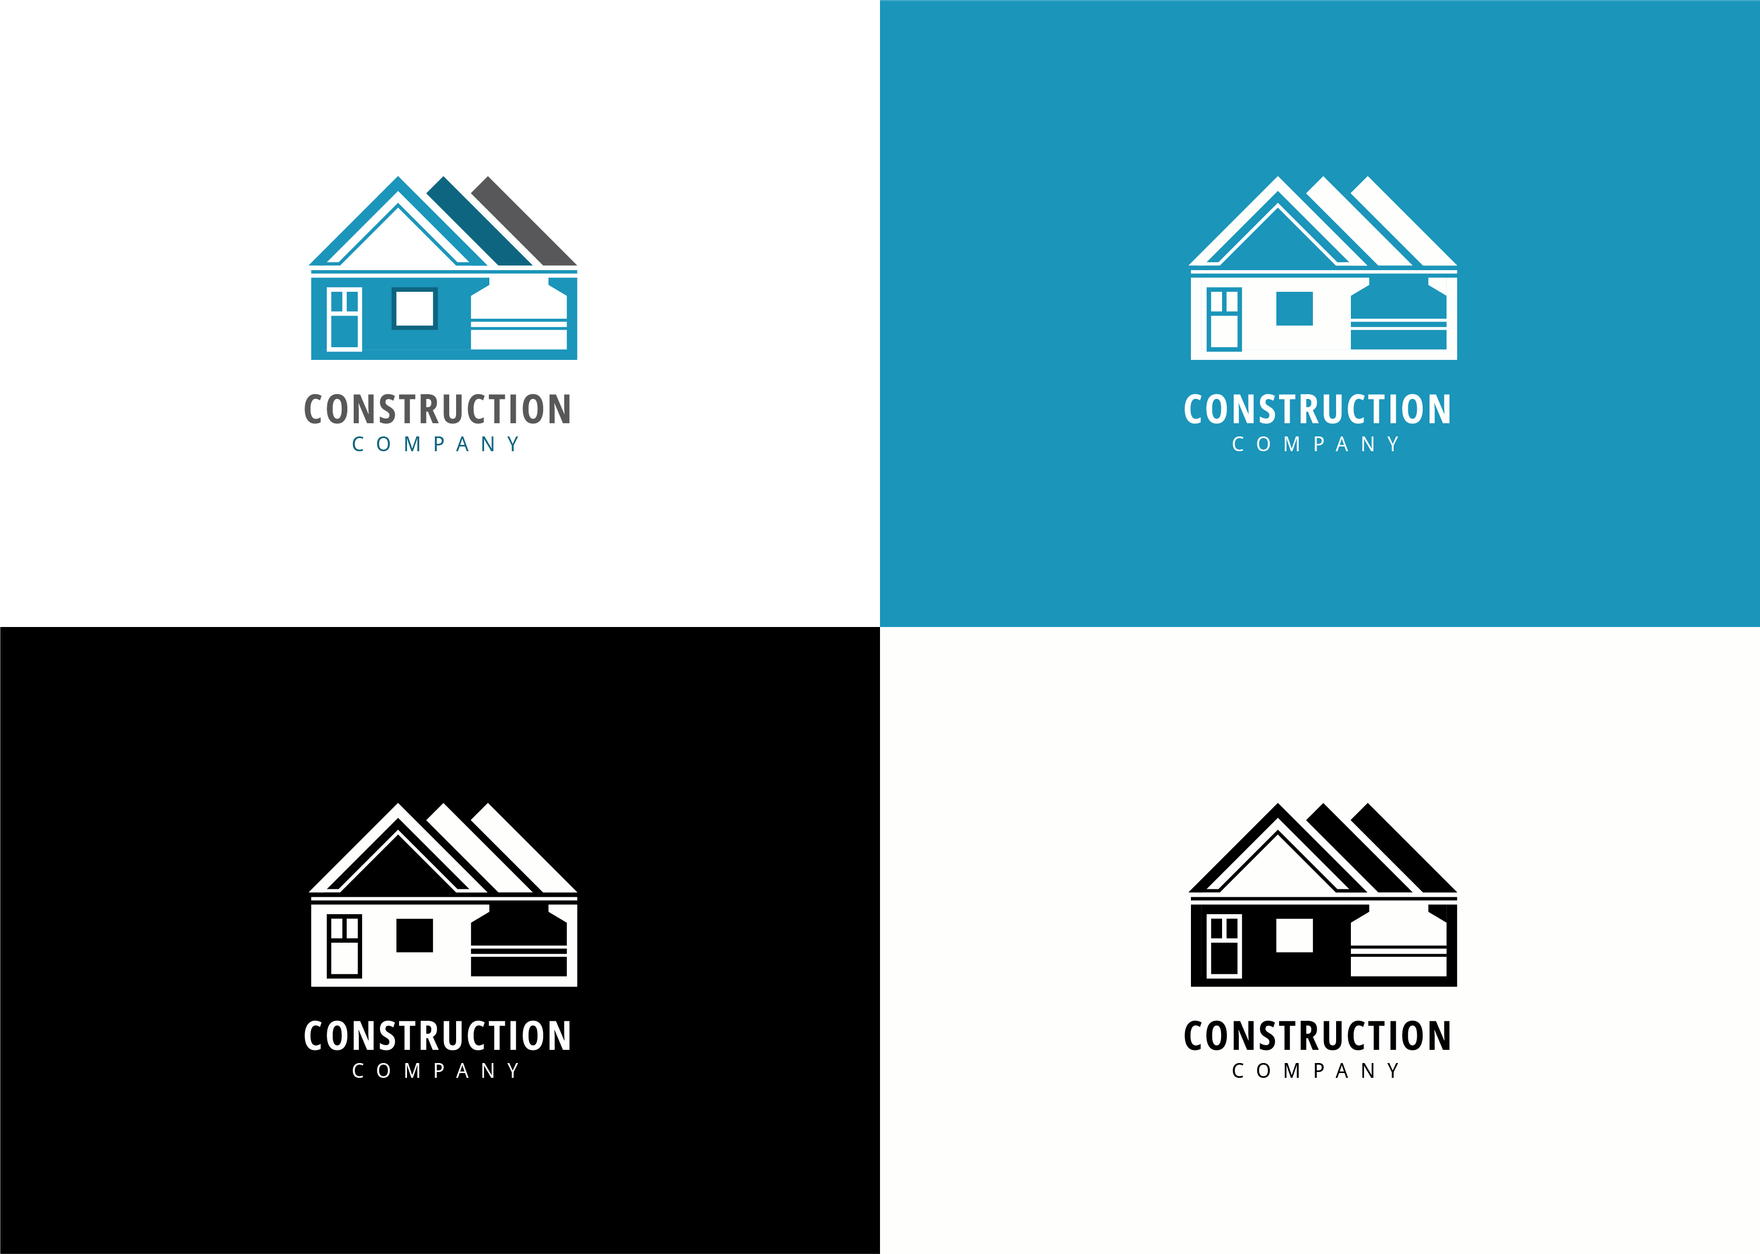 Construction Logo - Home Gallery Custom Design SIGN IN buildings on gable  roof of house | Construction logo, Business logo design, Construction  company logo